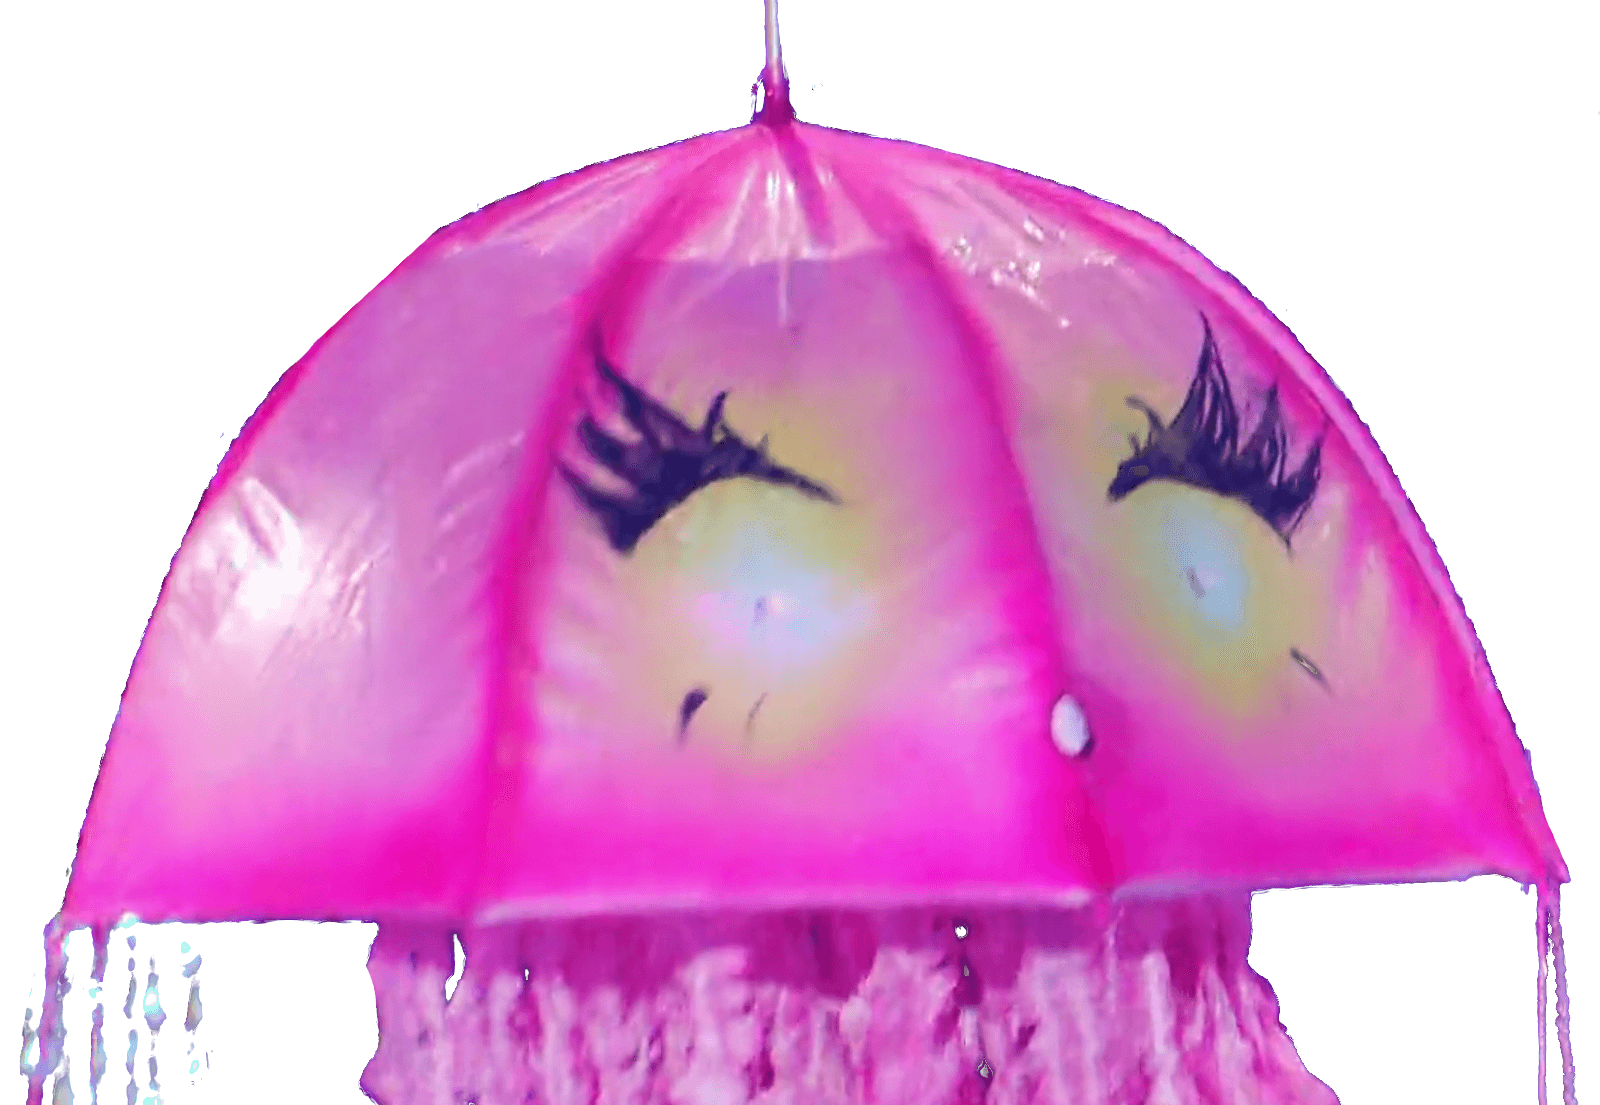 Yvie Oddly in her jellyfish outfit.